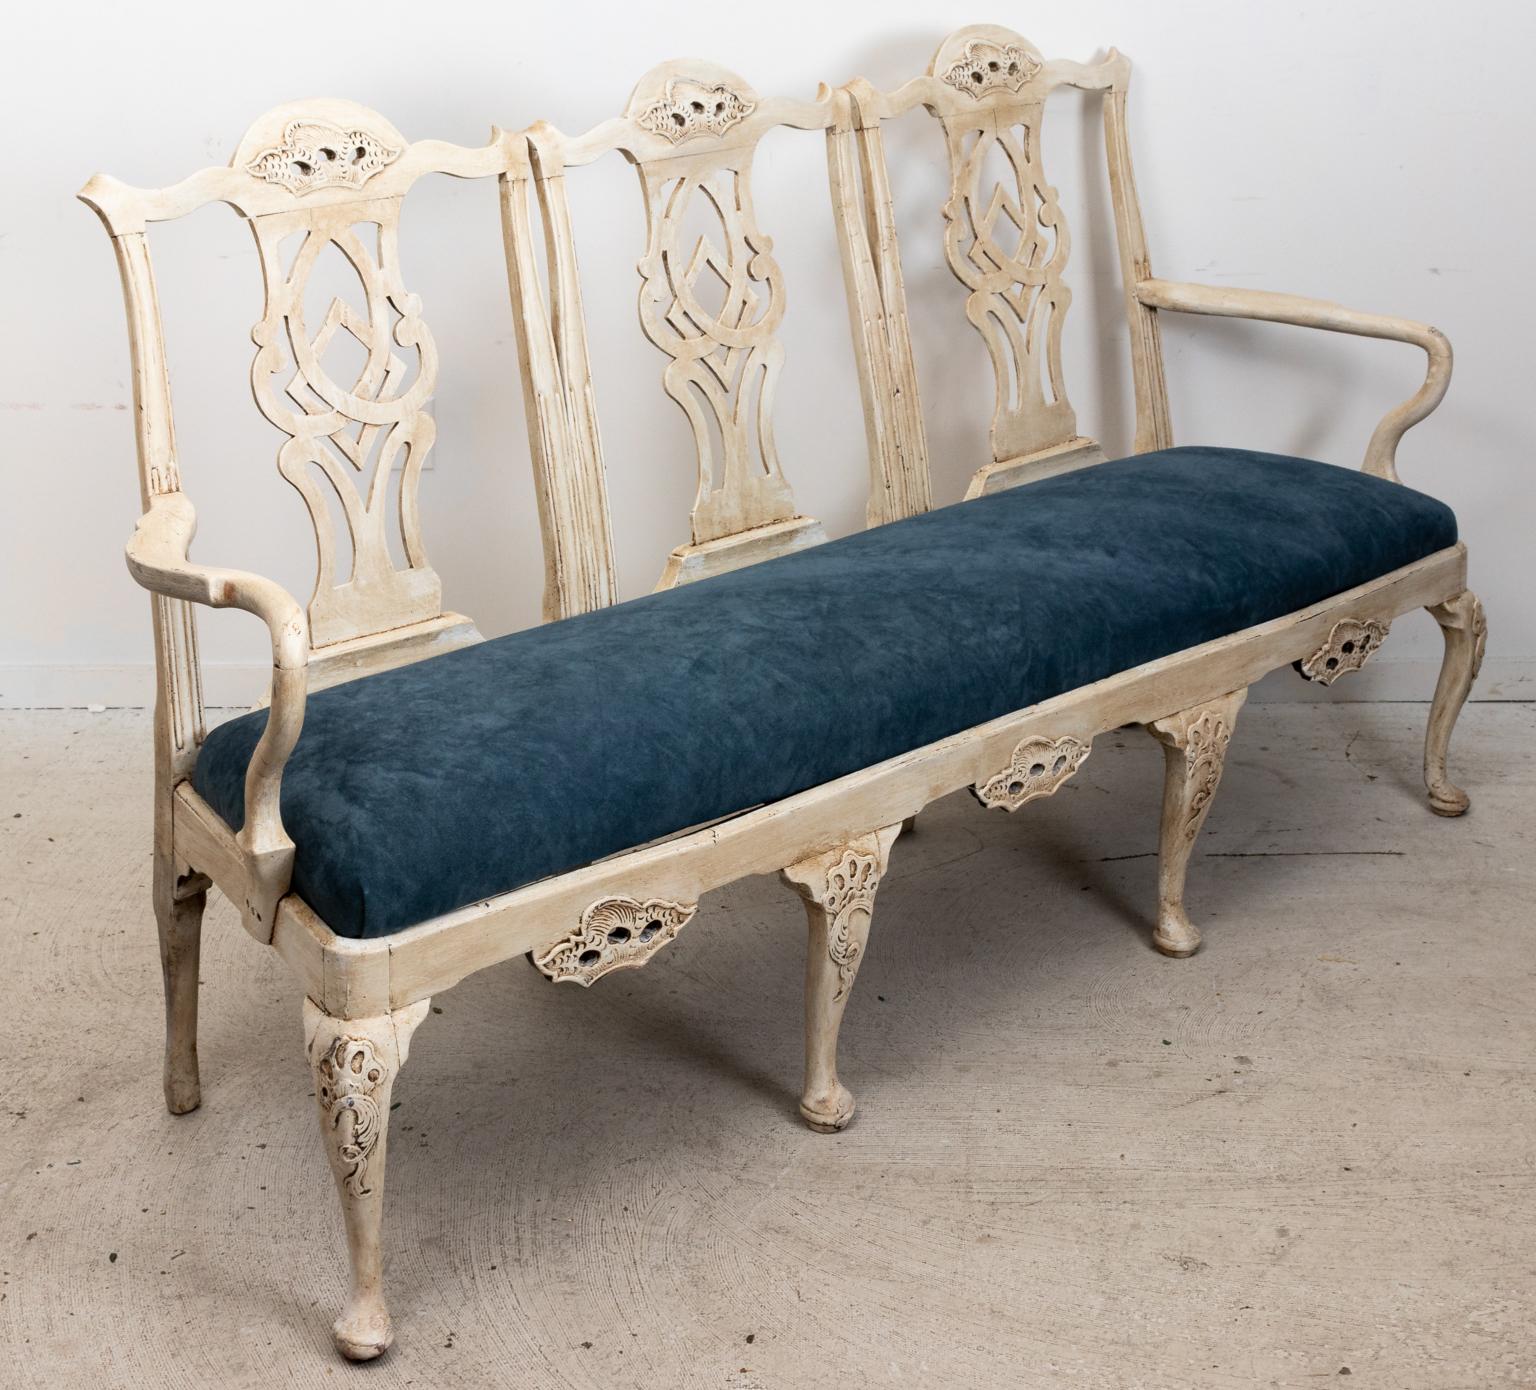 Painted settee in the Thomas Chippendale style with upholstered seat on cabriole legs with pad feet. The piece is further detailed with an ornately carved pierced back splat and bottom seat apron. The knees of the legs also feature scrolled motifs.